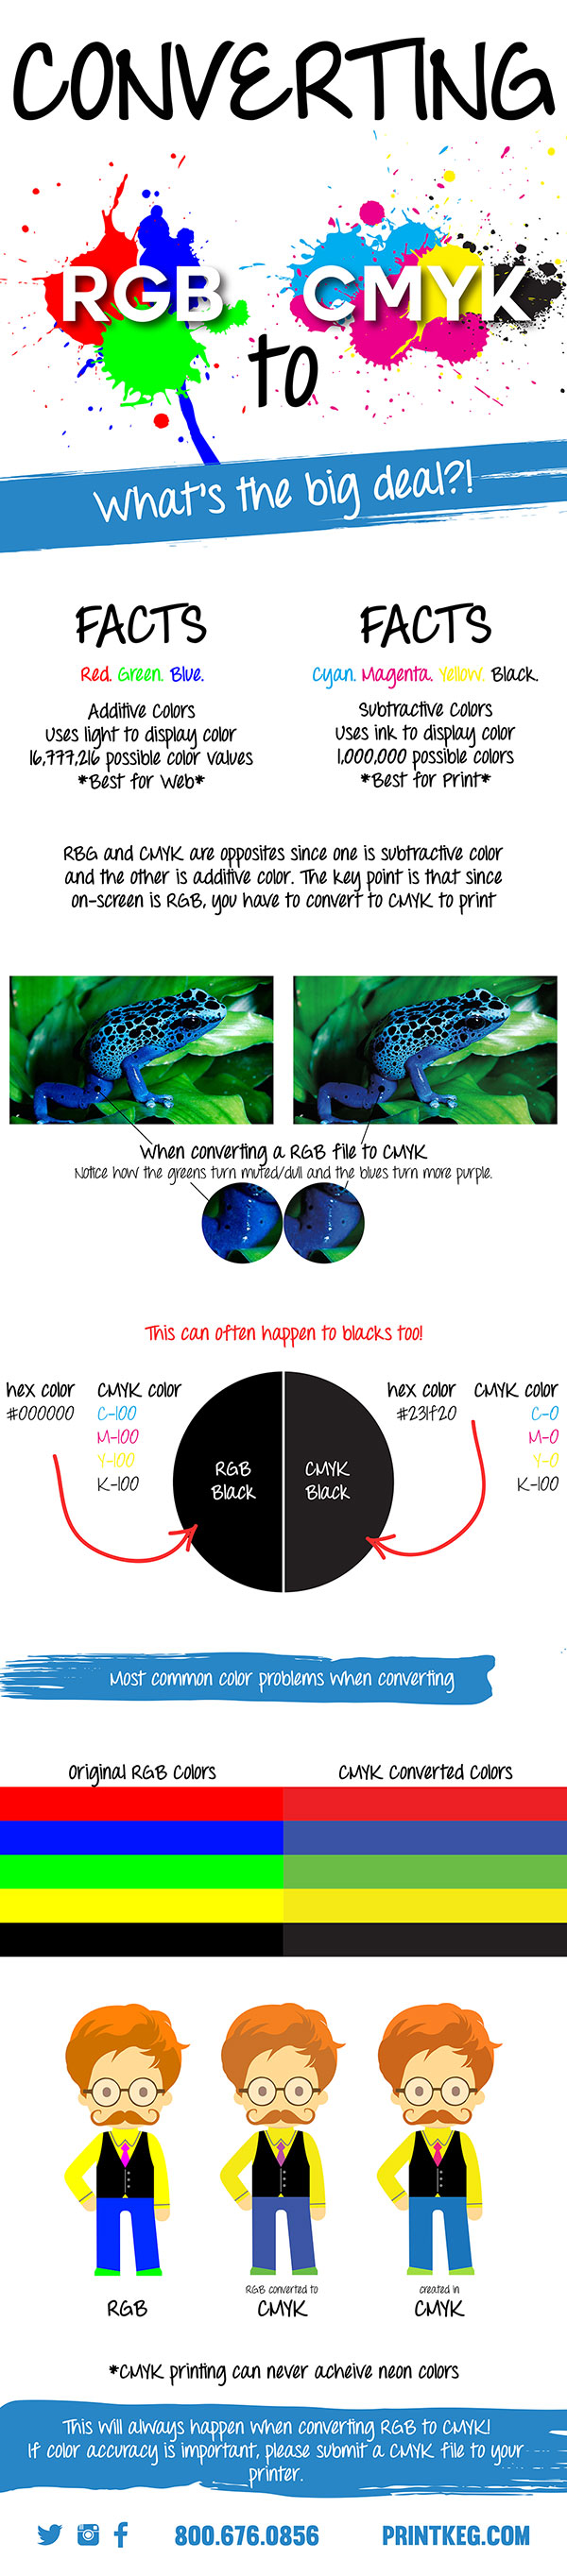 Infographic about converting RGB to CMYK